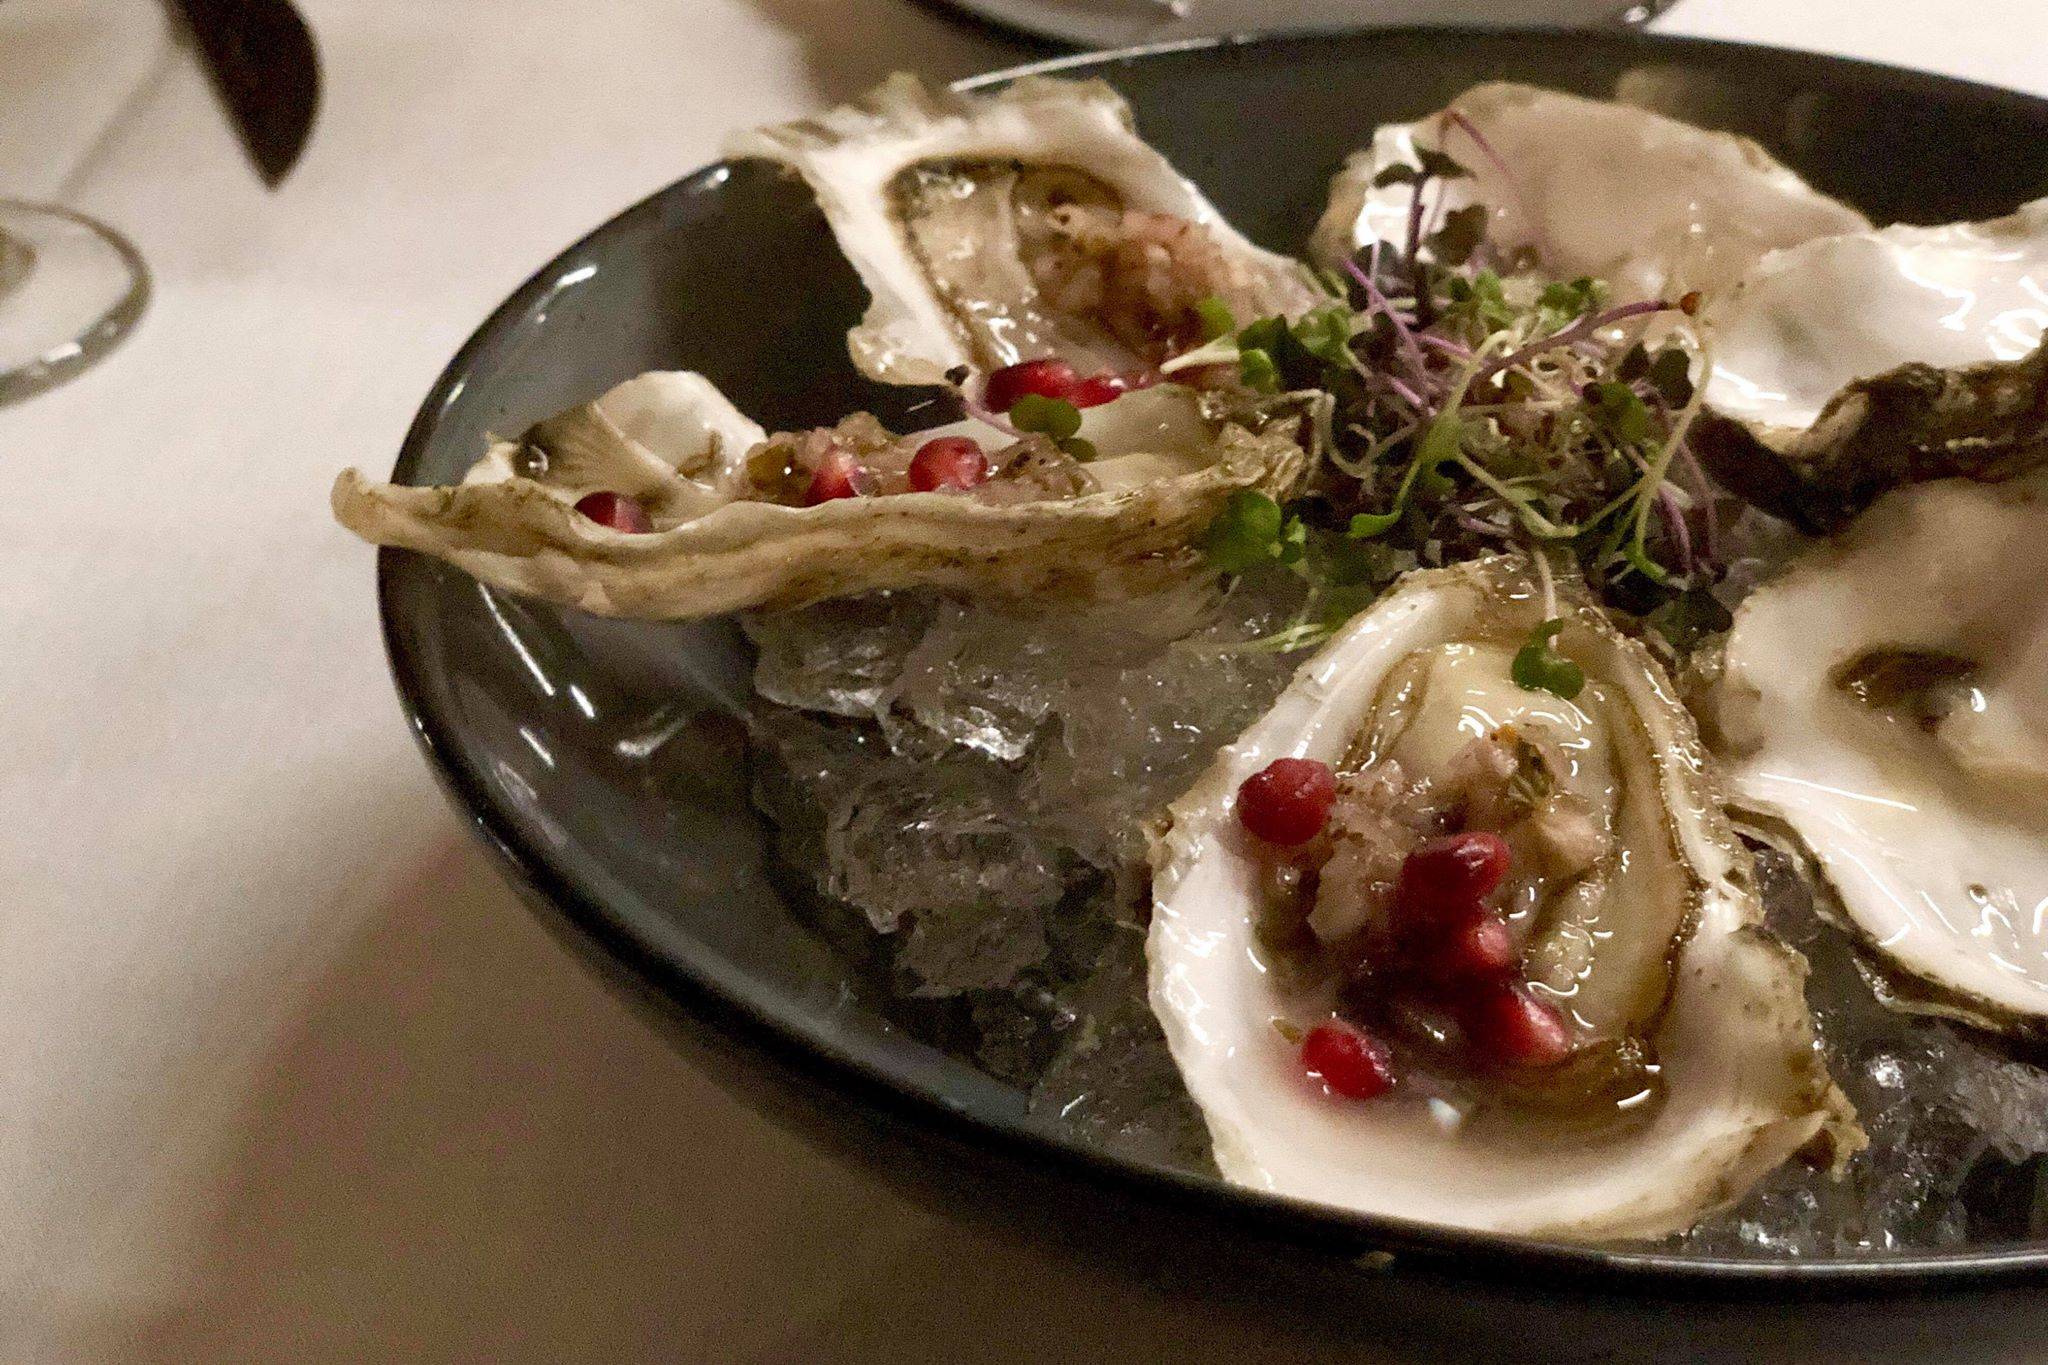 Addie Camp Train Eatery and Wine Bar strives to feature local food on their menu as much as possible, like oysters from Jacalof Bay, on Monday, Dec. 31, 2018, in Soldotna, Alaska. (Photo by Victoria Petersen/Peninsula Clarion)